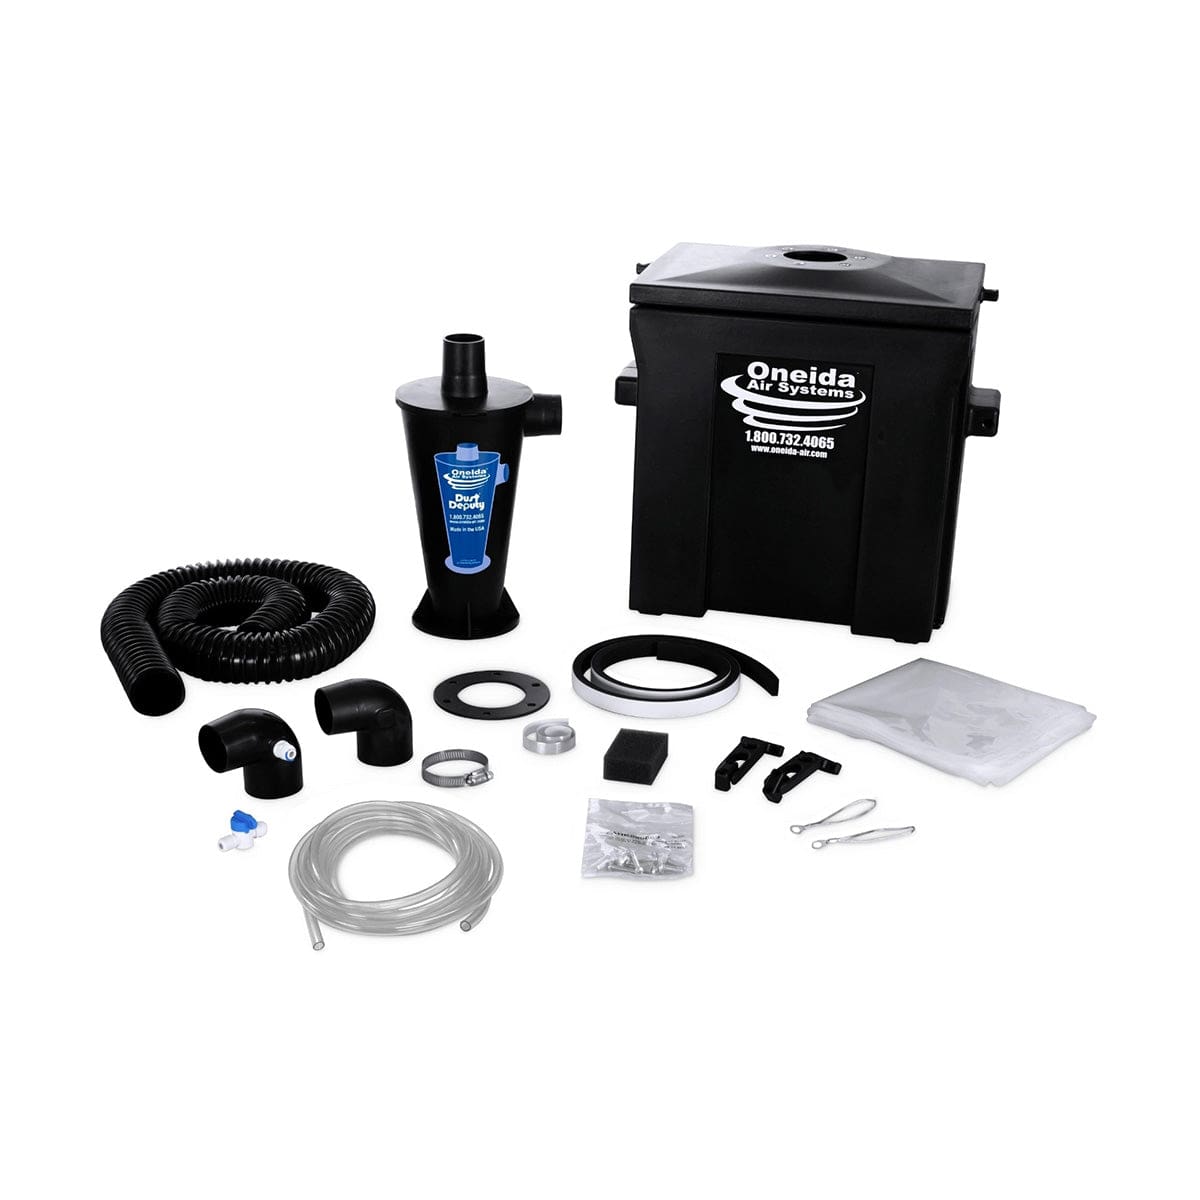 Oneida Air AXD000009 Dust Collector Systainer Cyclone Separator Kit